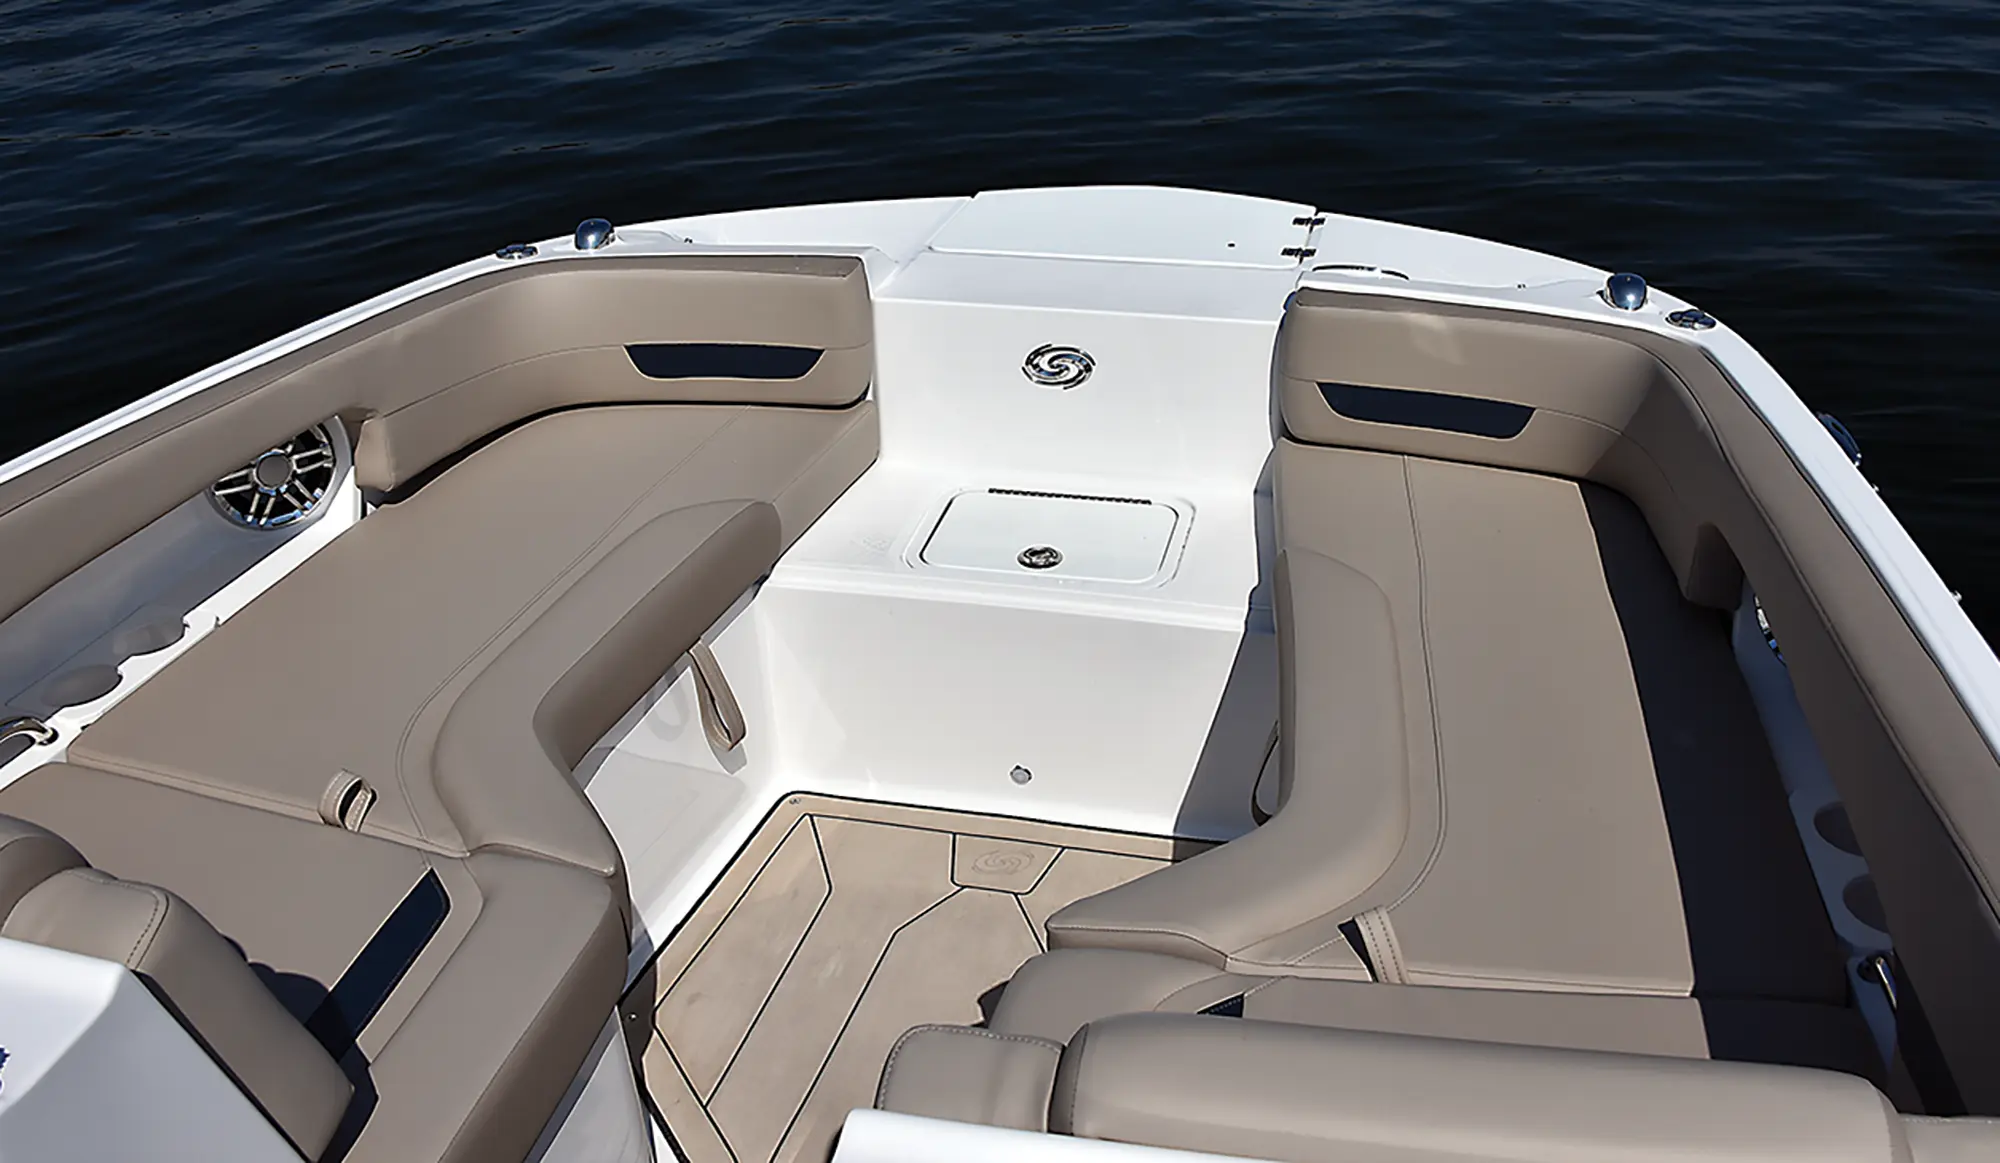 Aerial interior photo view of a lounge couches area of the Hurricane SunDeck 235 pontoon motorboat vehicle